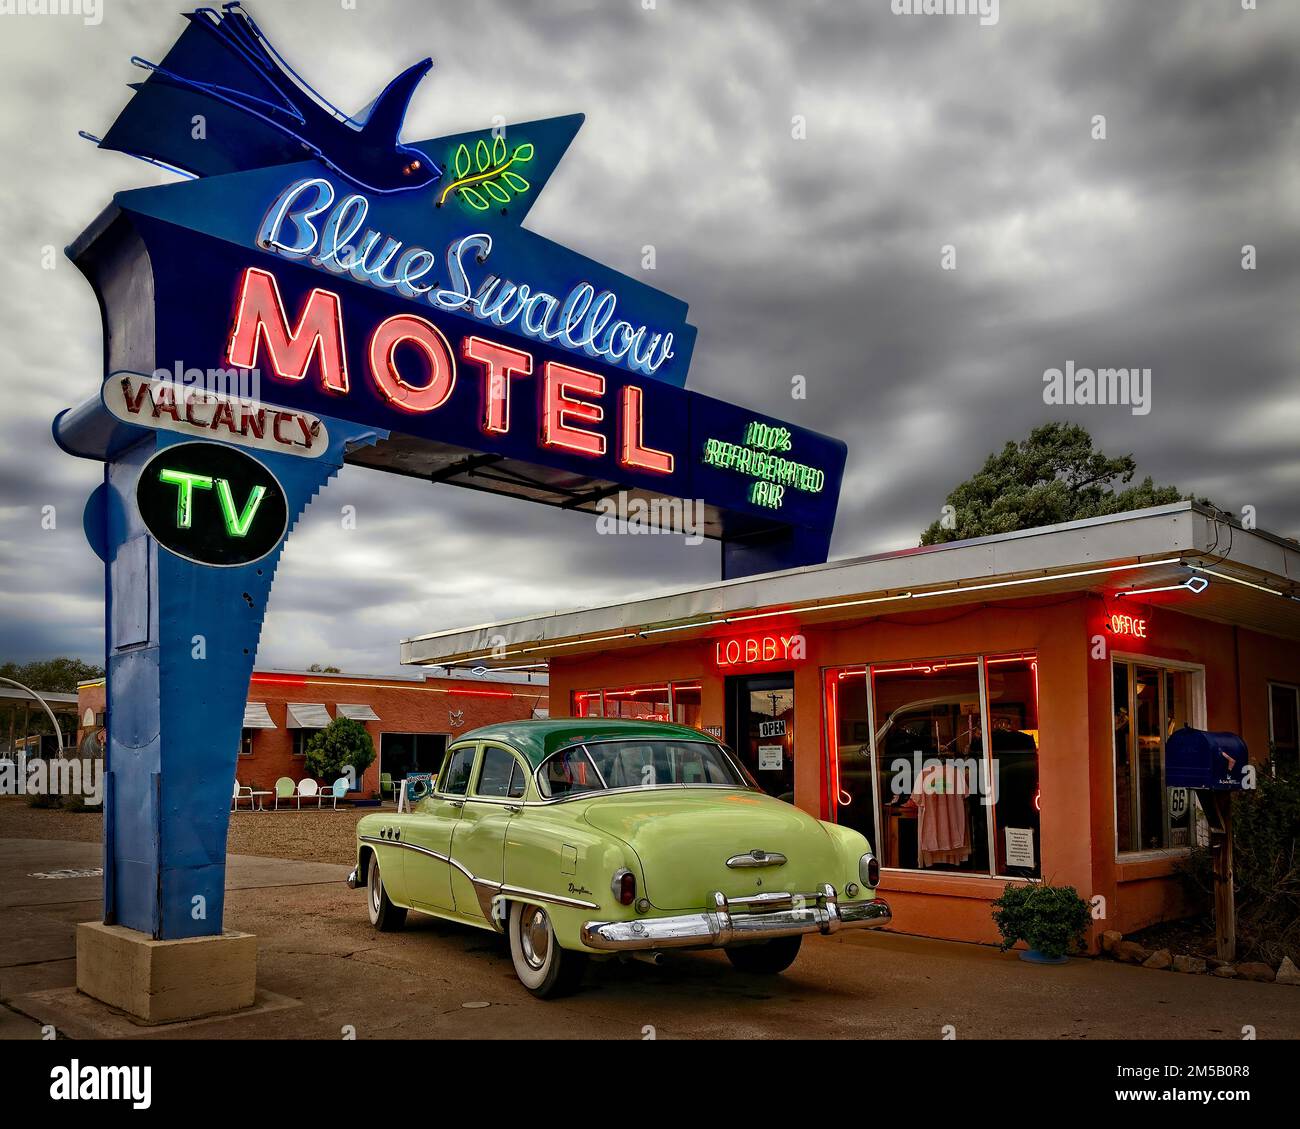 The Blue Swallow Motel, built in 1939, still operates on historic Route 66 in Tucumcari, New Mexico. Stock Photo